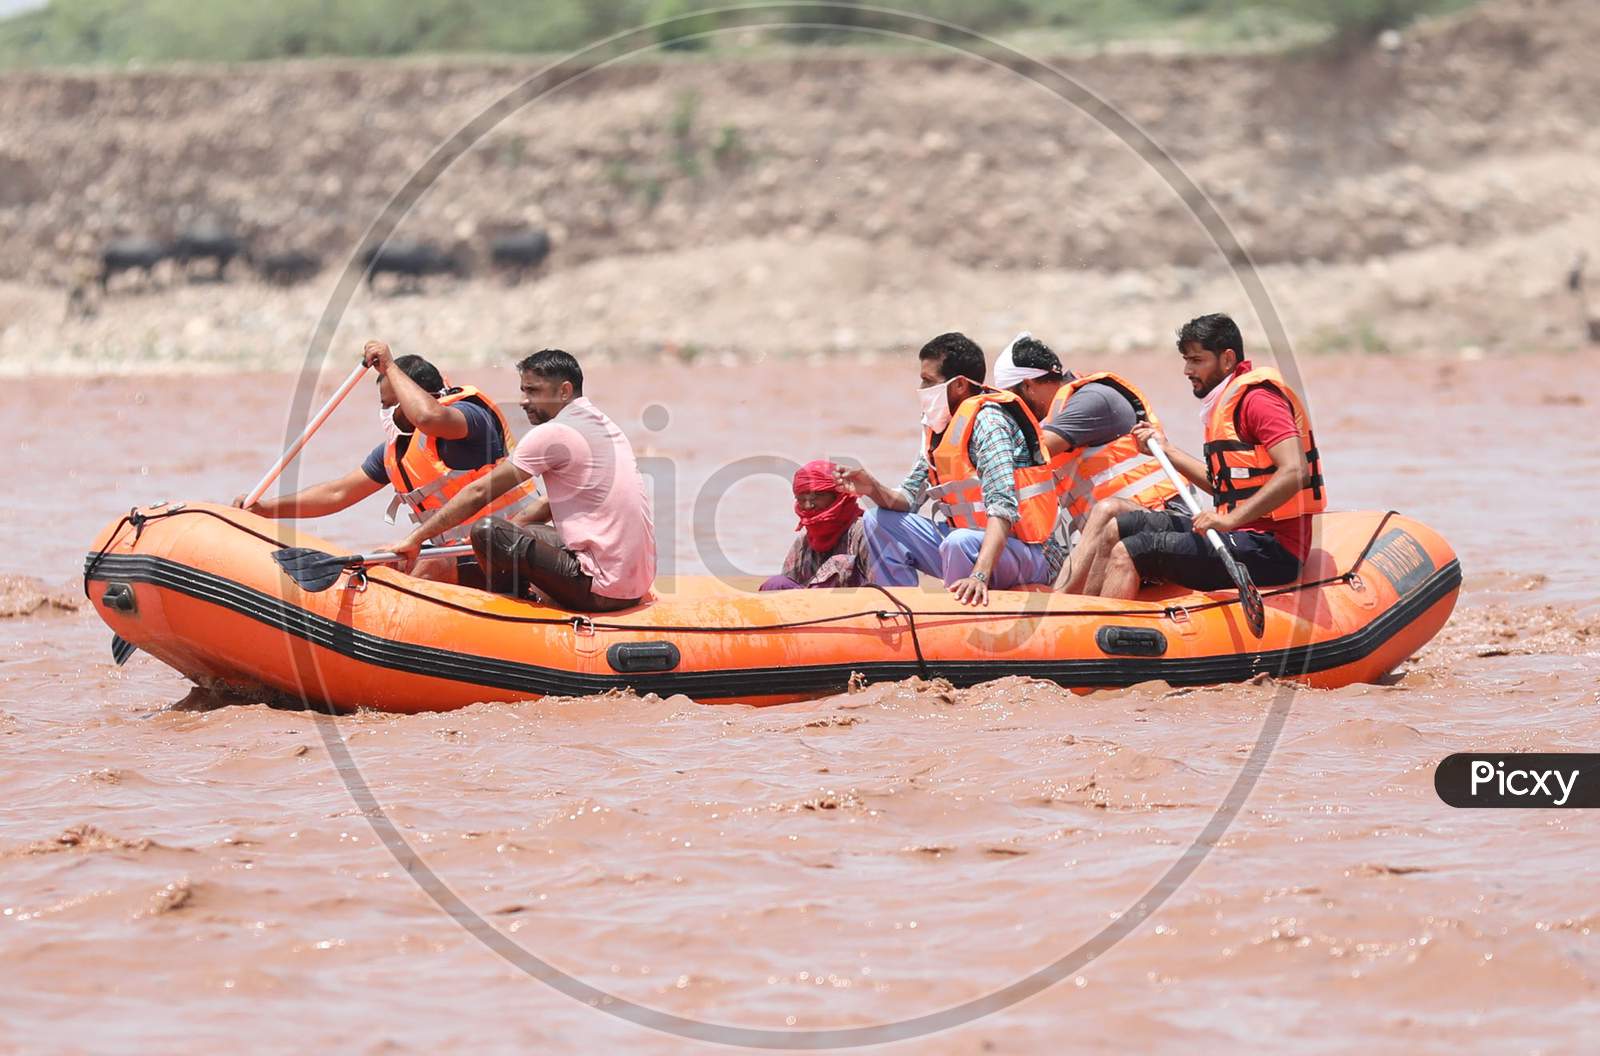 SDRF personnel rescue a woman who was caught in the Tawi River as water levels rose due to heavy rainfall on July 08, 2020 in Jammu